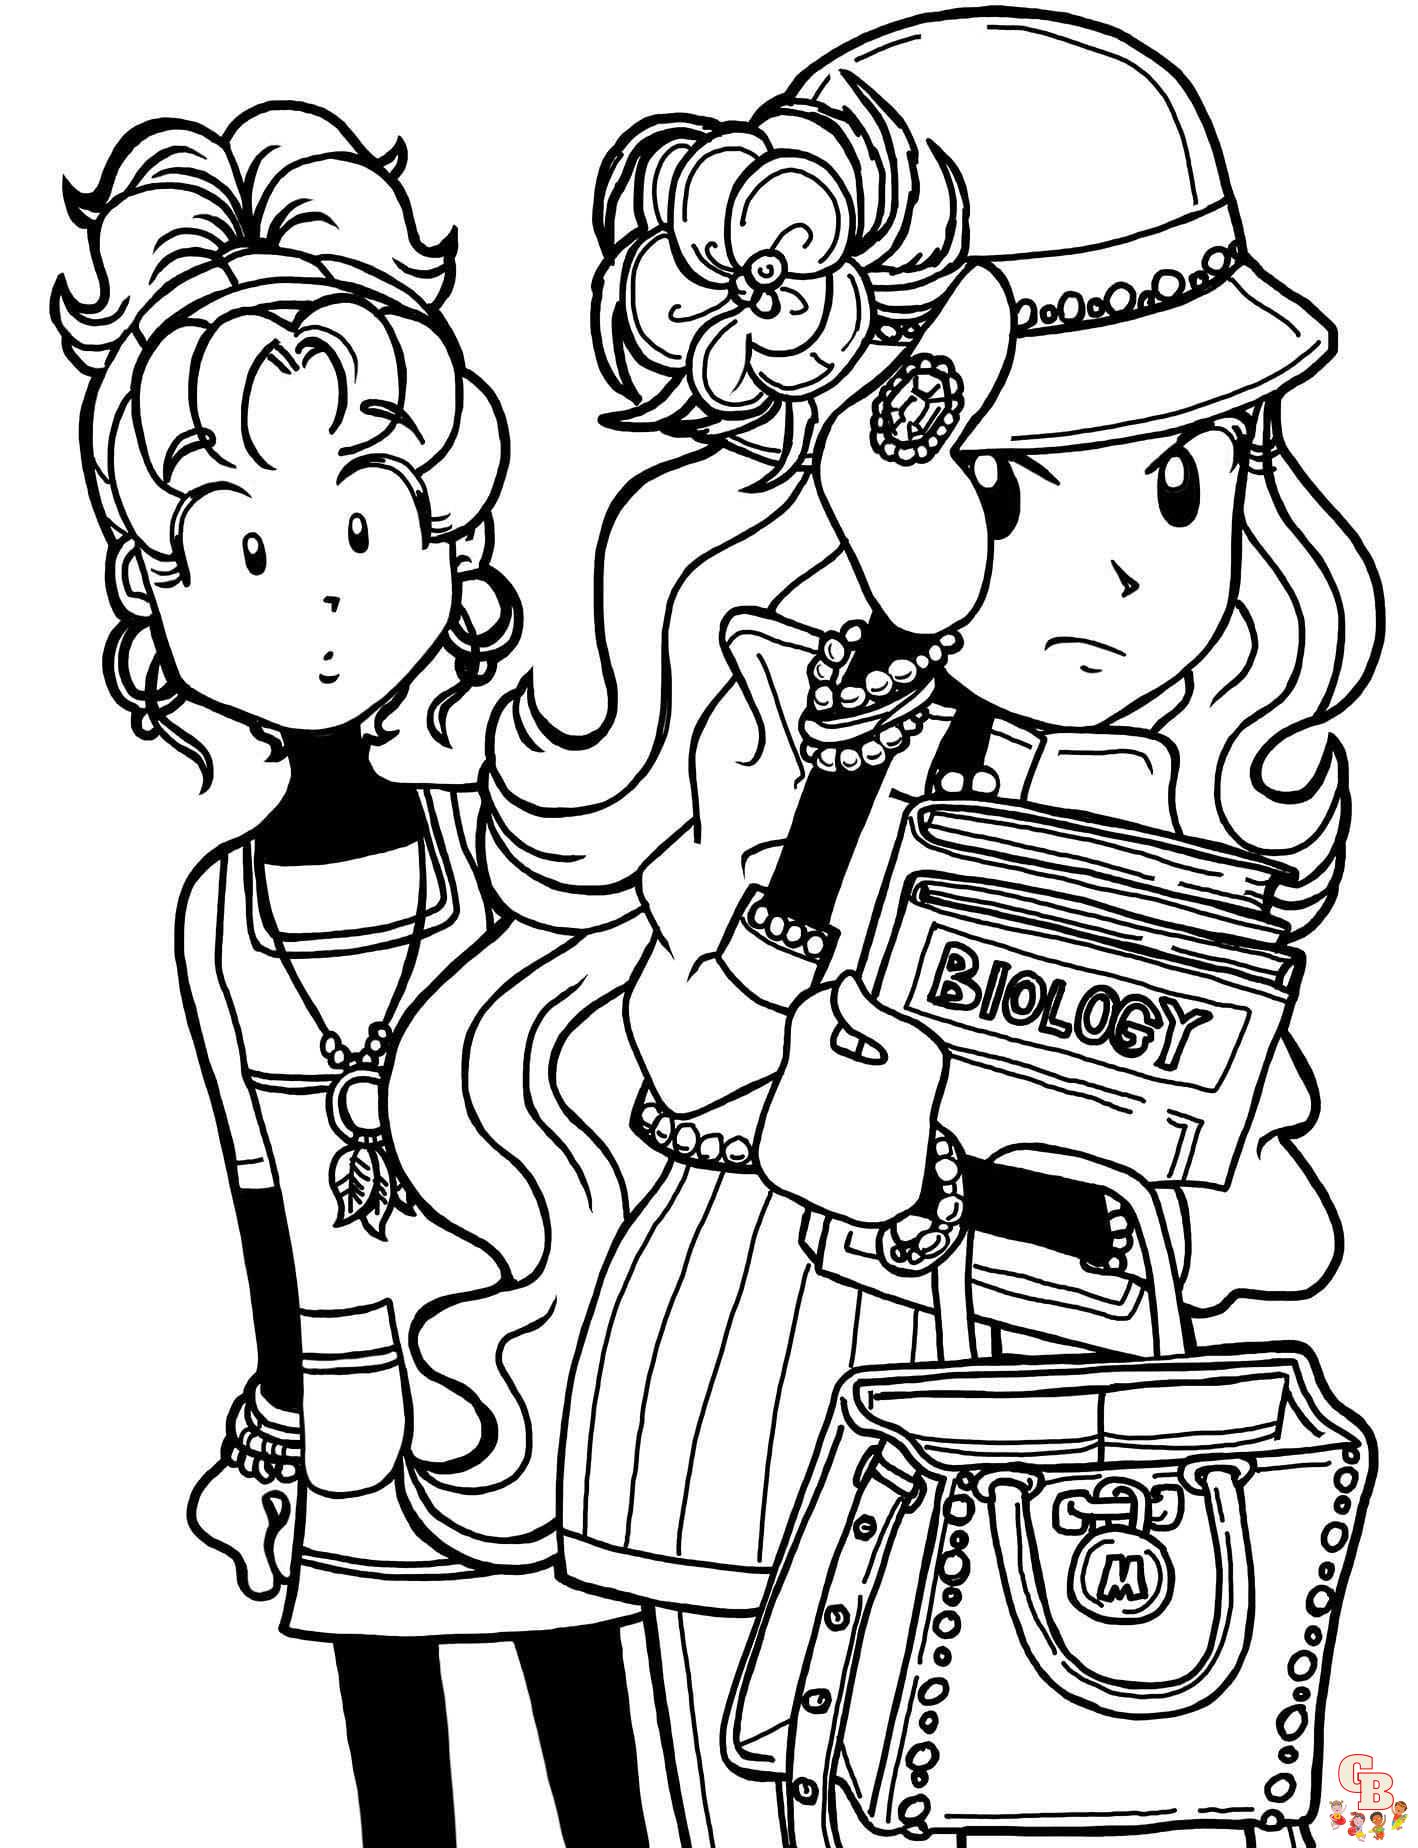 Free Dork Diaries coloring pages for kids